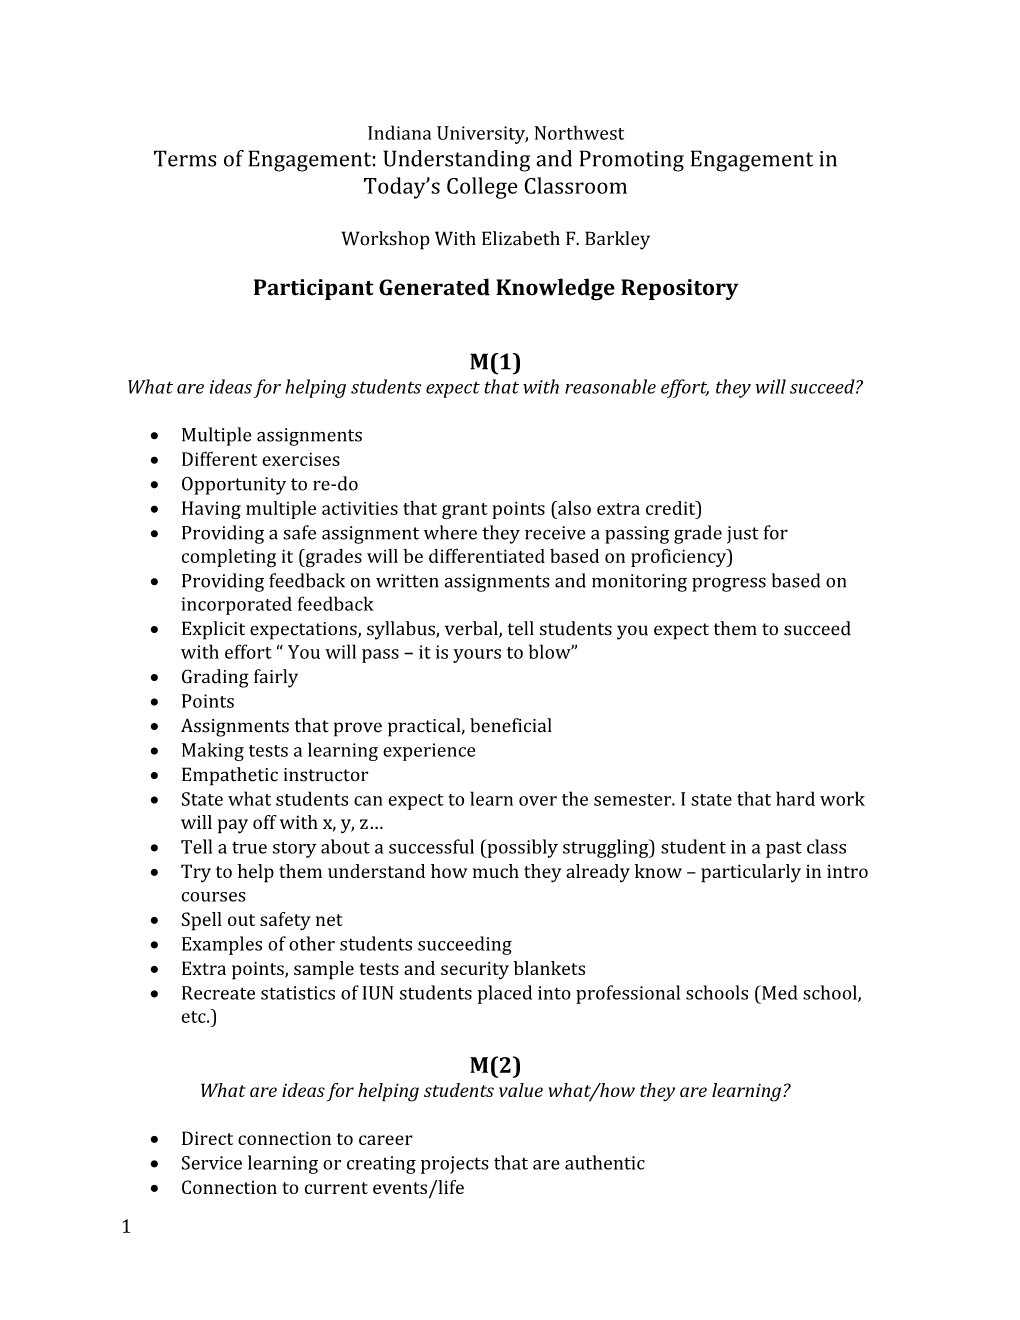 Terms of Engagement: Understanding and Promoting Engagement in Today S College Classroom